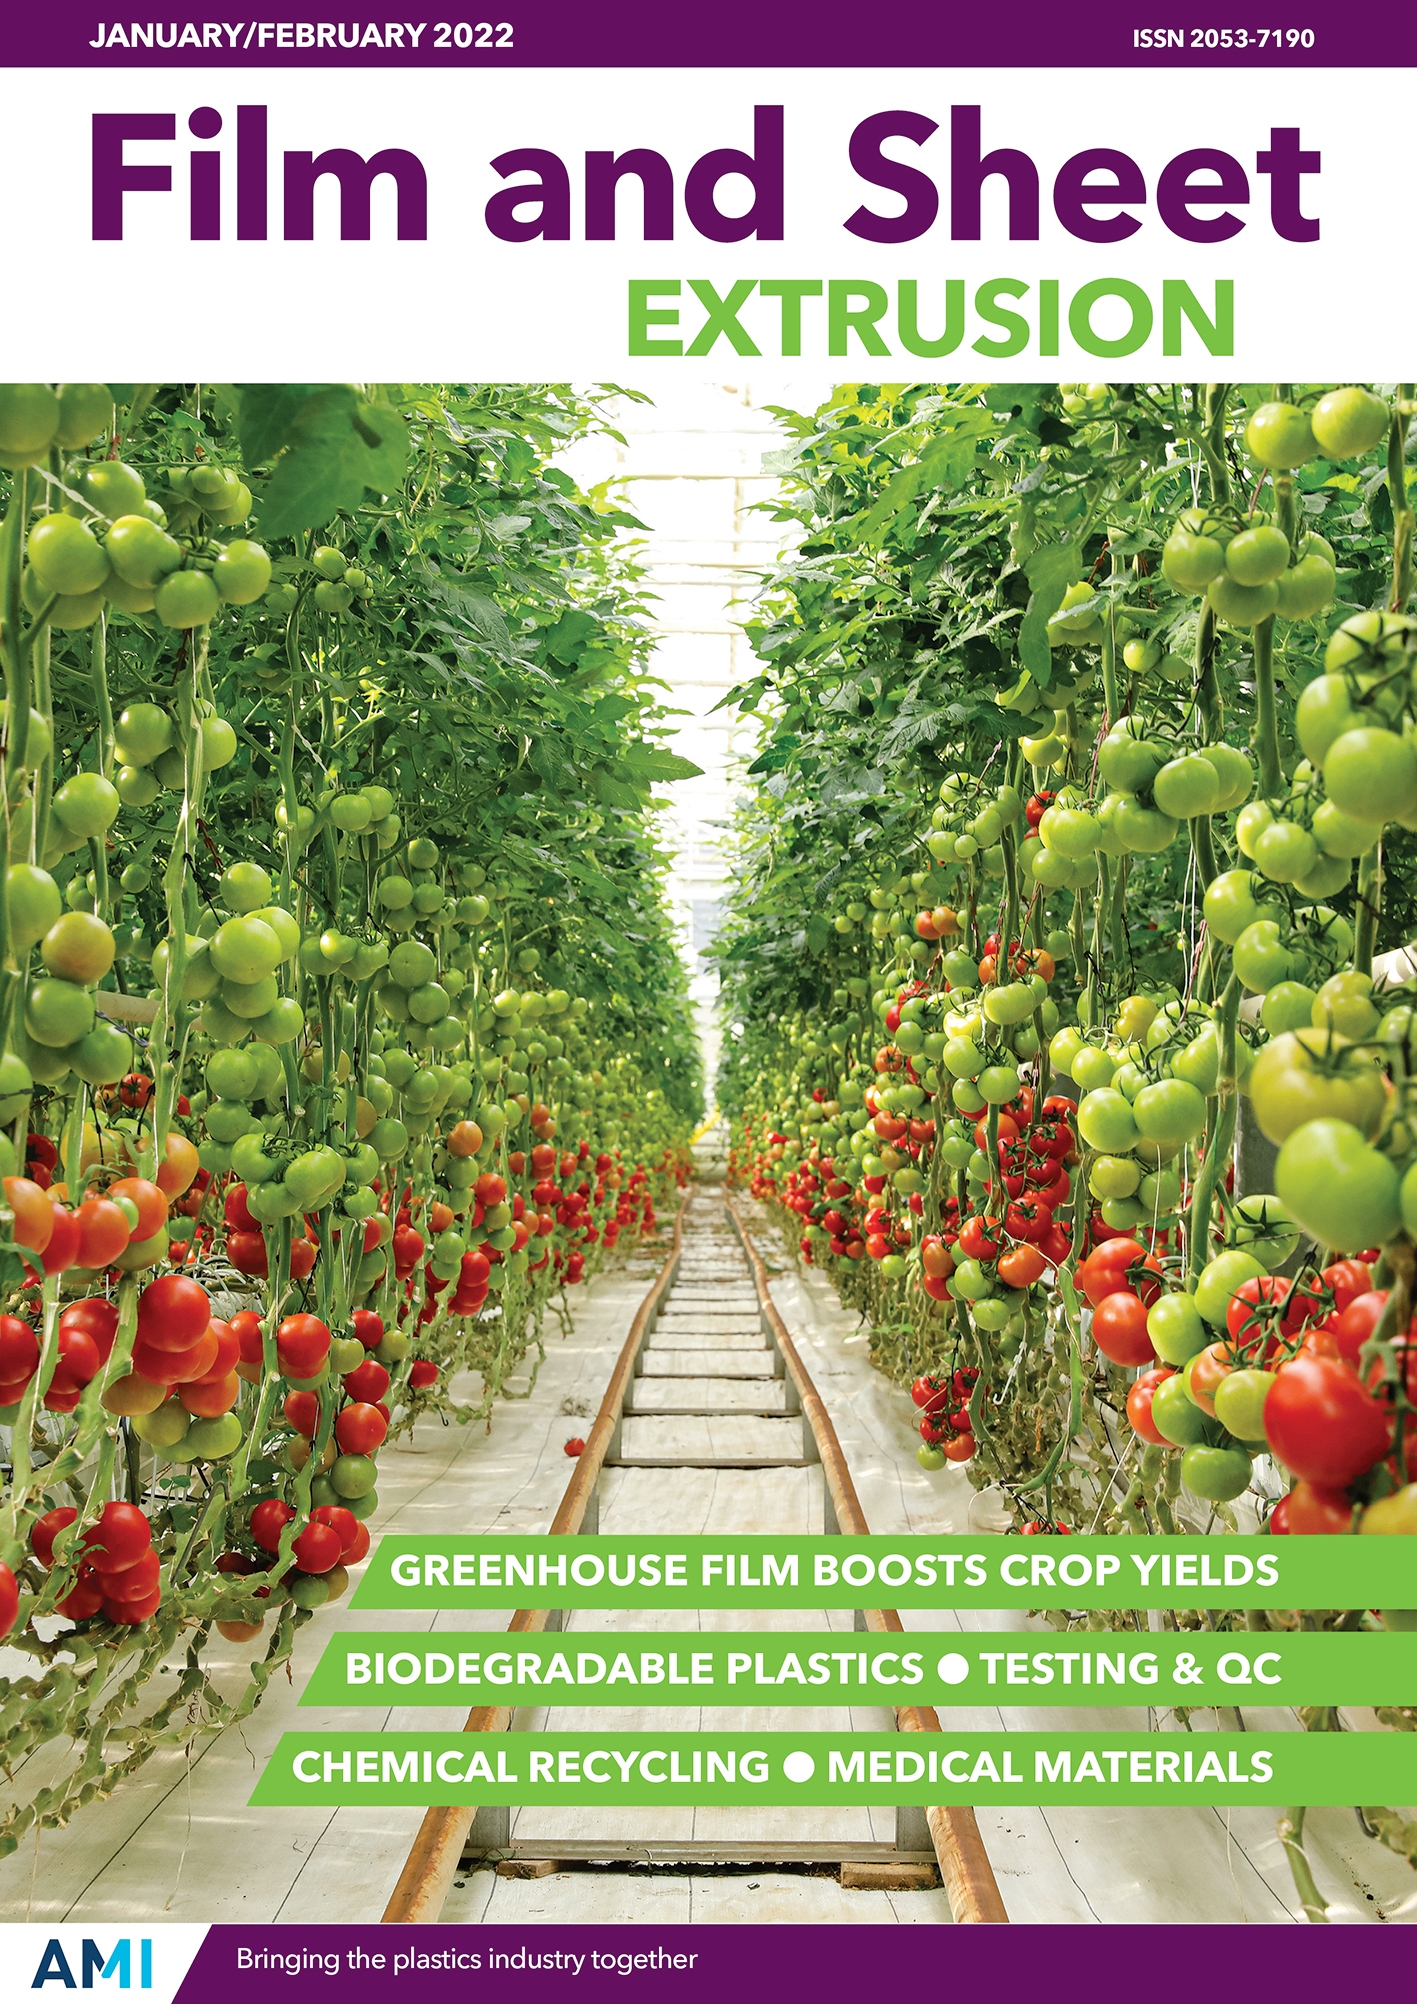 Film and Sheet Extrusion January/February 2022